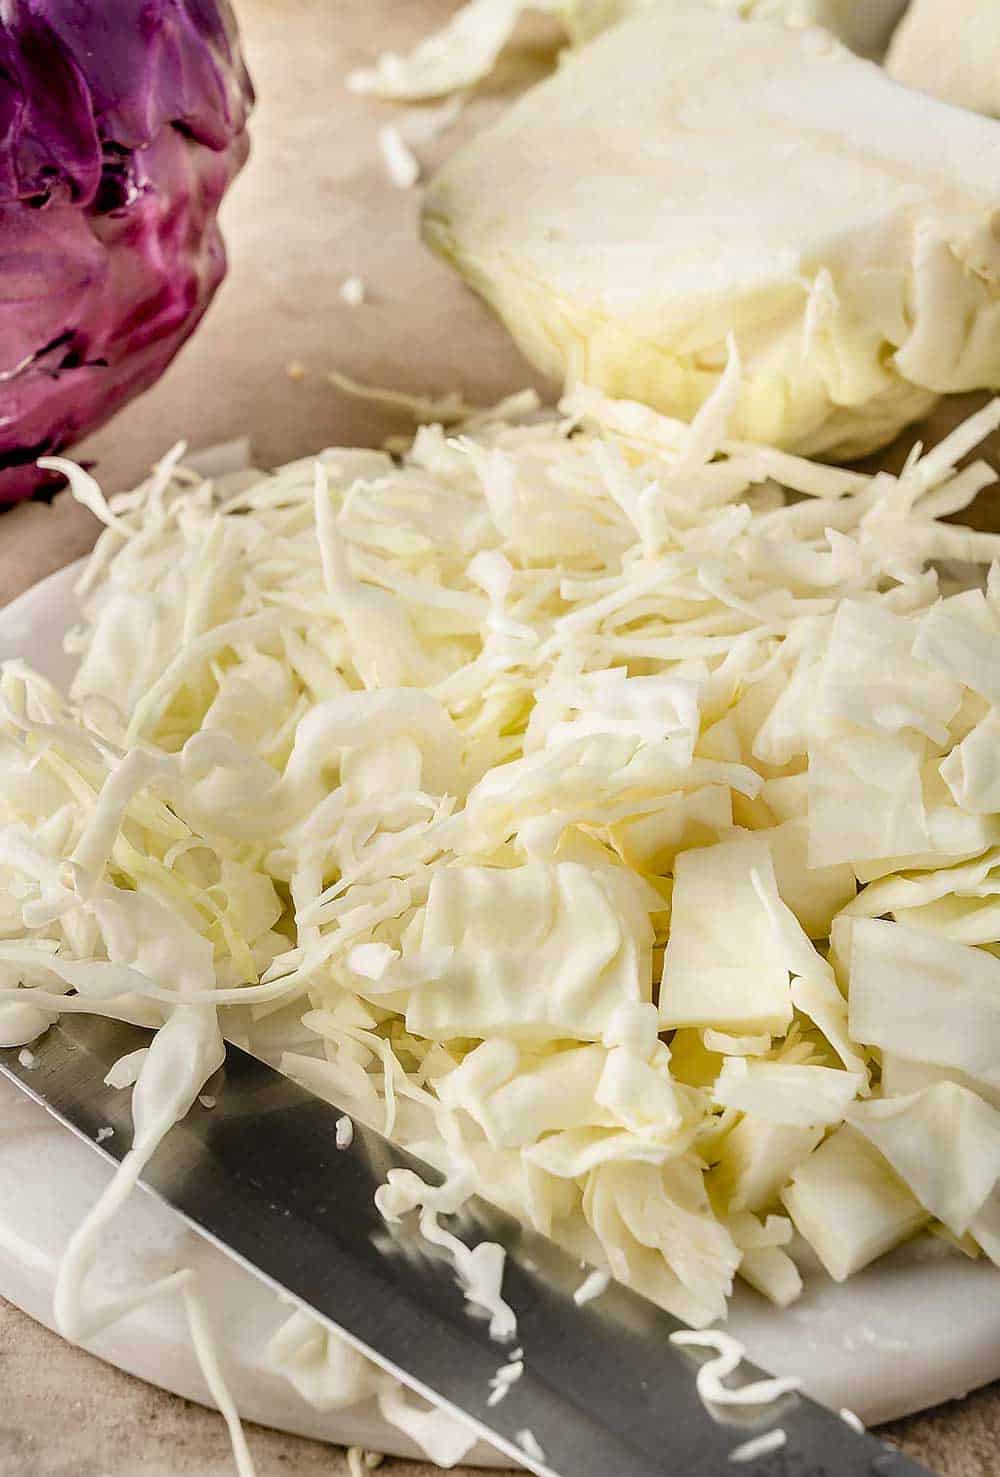 Image of freshly cut cabbage on a white cutting board, shredded and cut into thin squares, and cut into wedges, with a kitchen knife beside it.